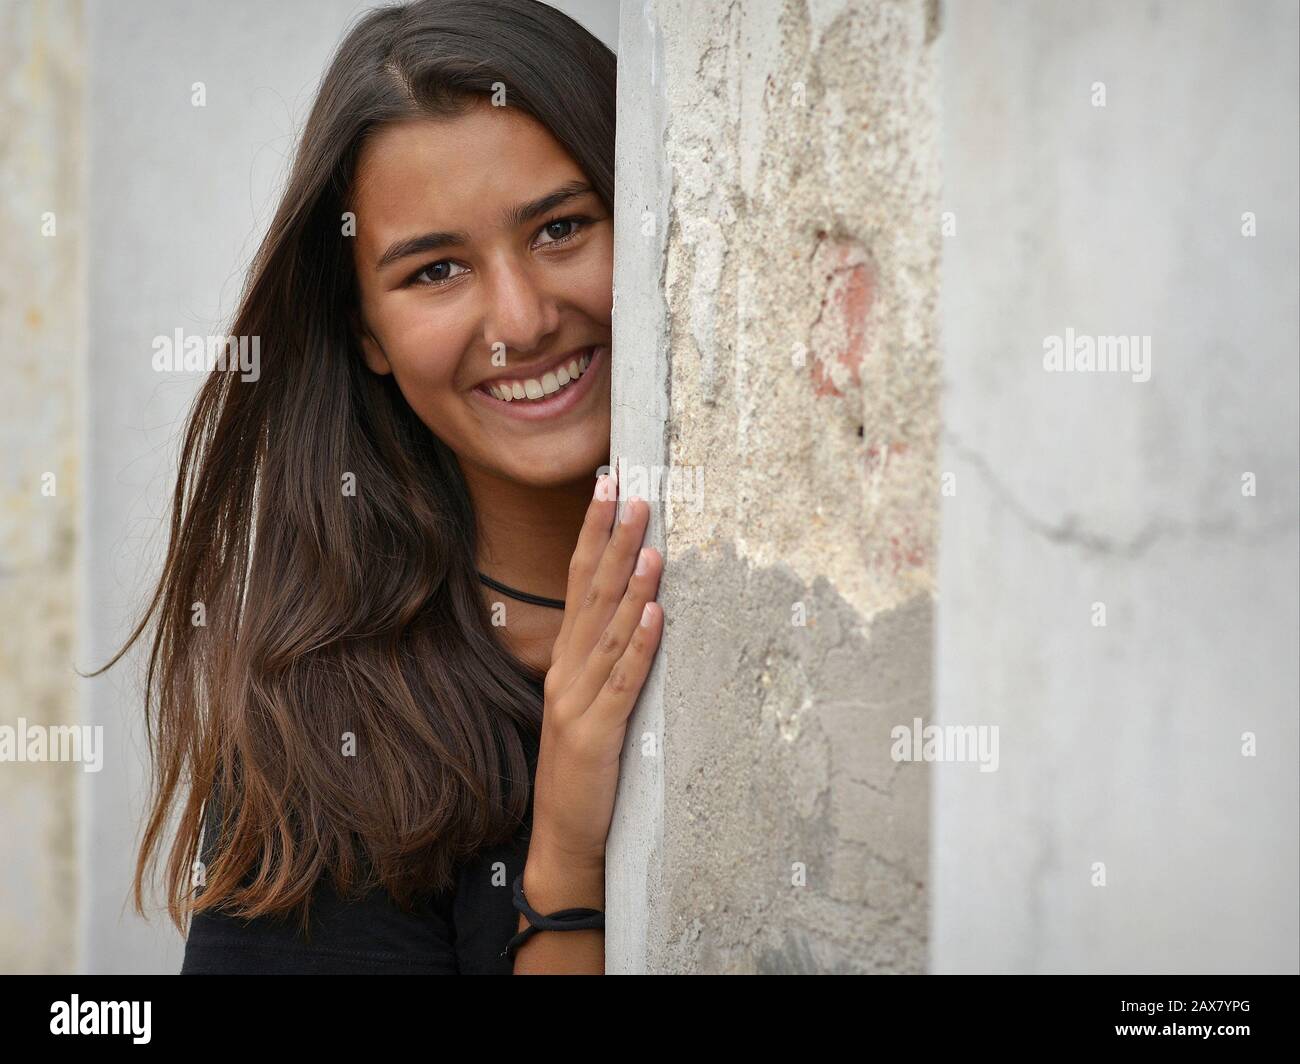 Young woman with beautiful hair smiles and looks around the corner of an old house. Stock Photo